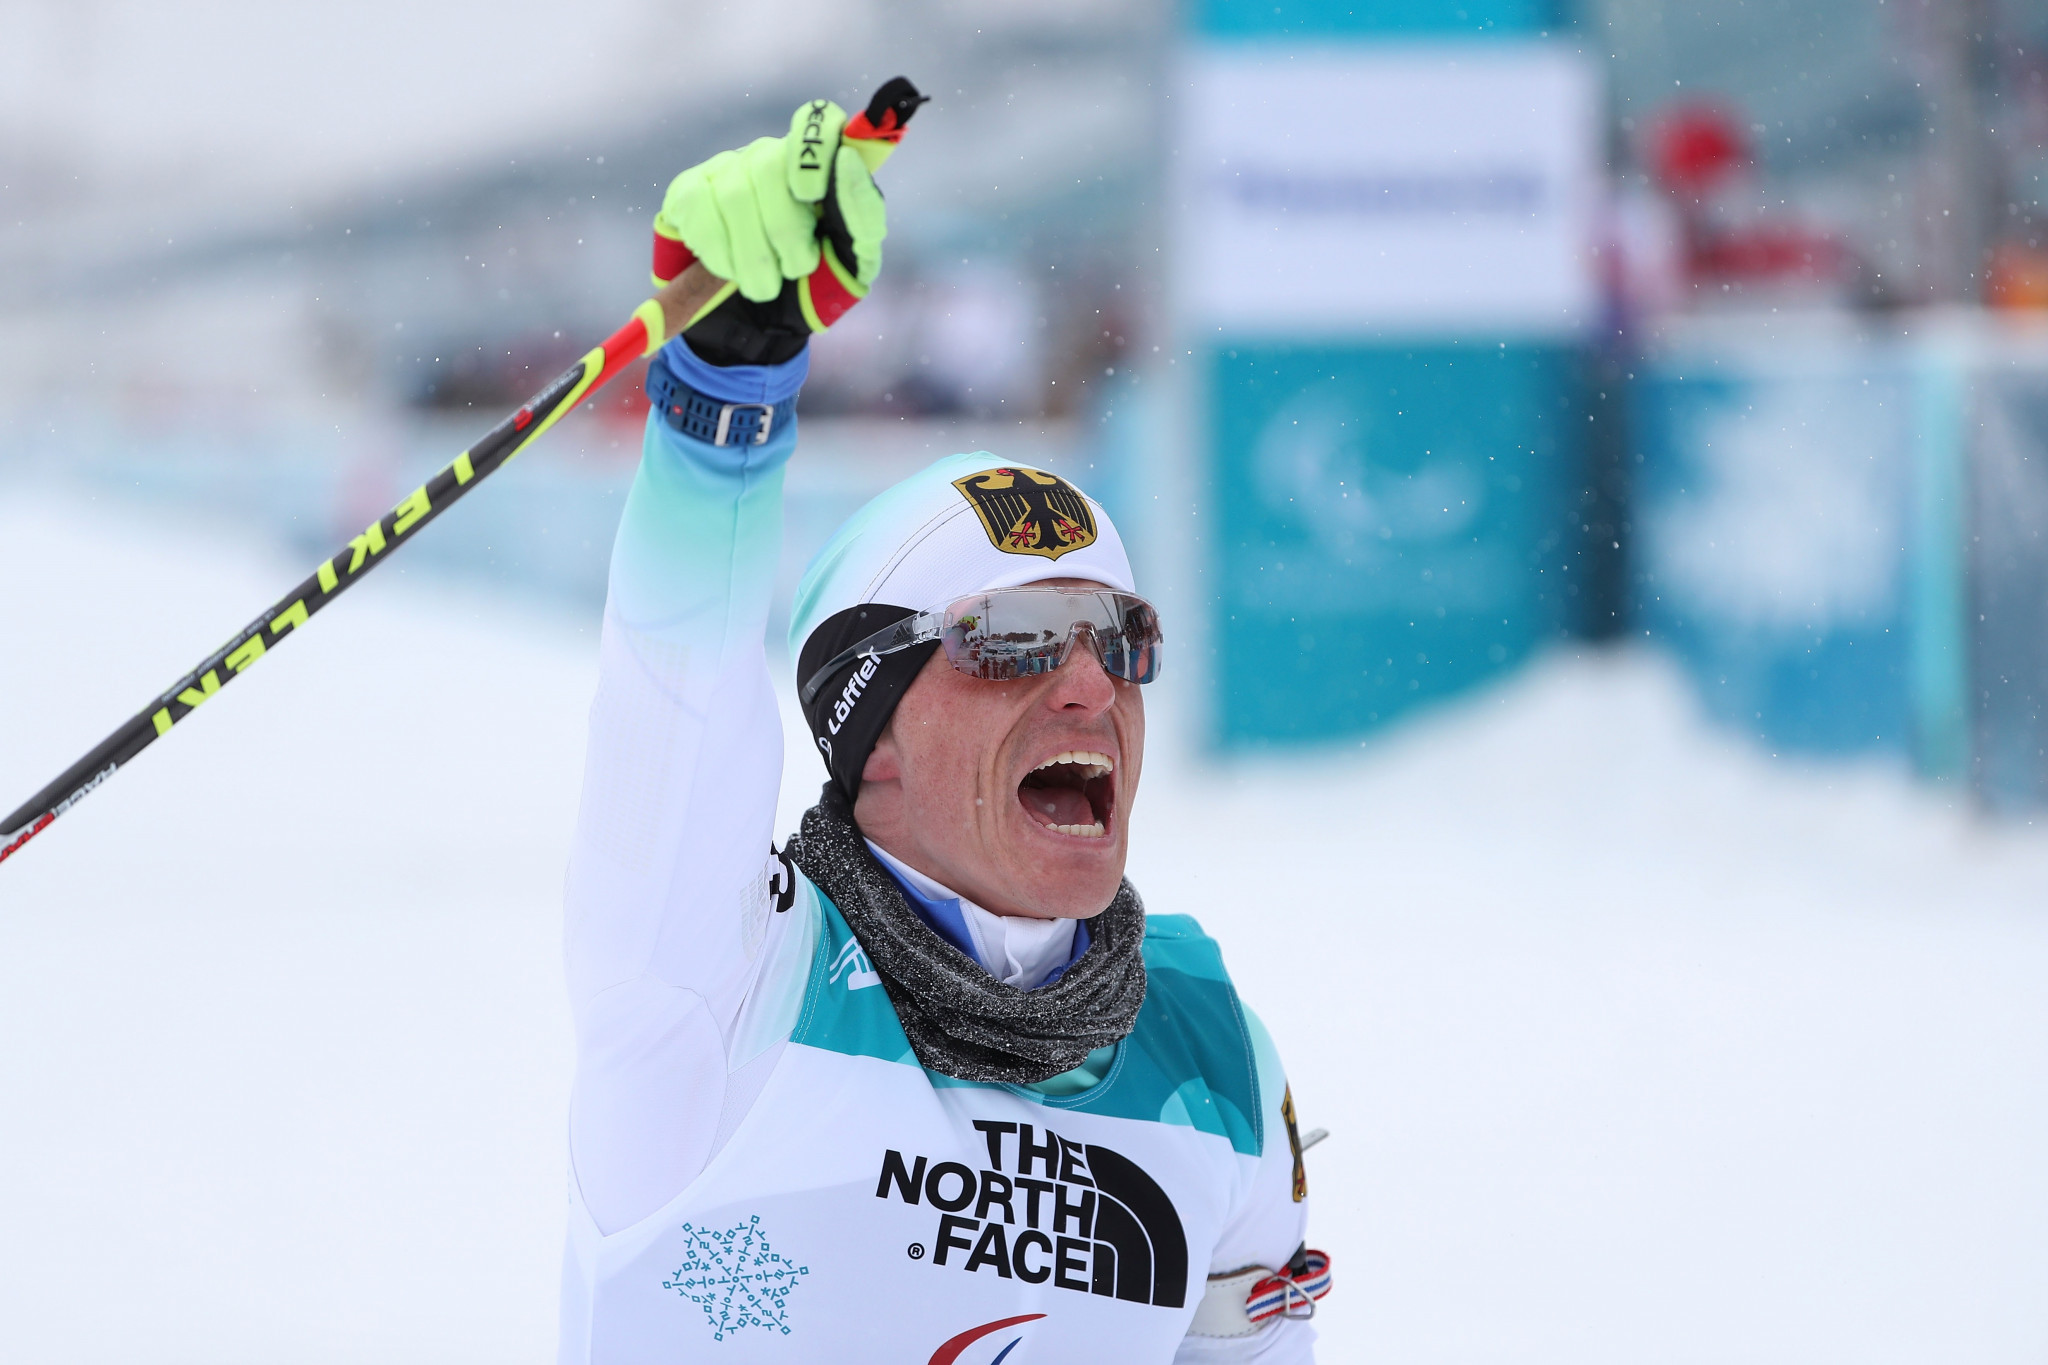 Following Eskau's triumph in the women's 12.5 kilometres event, Martin Fleig came out on top in the men's 15km race ©Getty Images